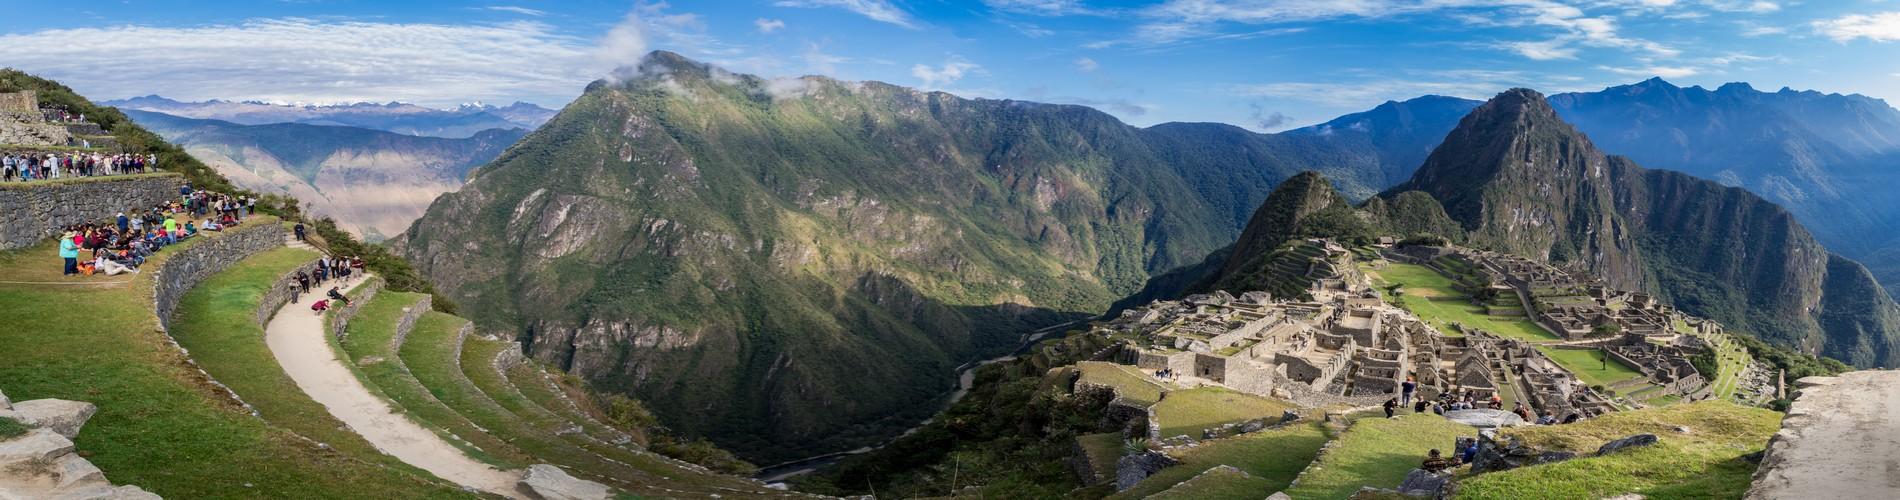 TOP TIPS FOR PURCHASING MACHU PICCHU TICKETS